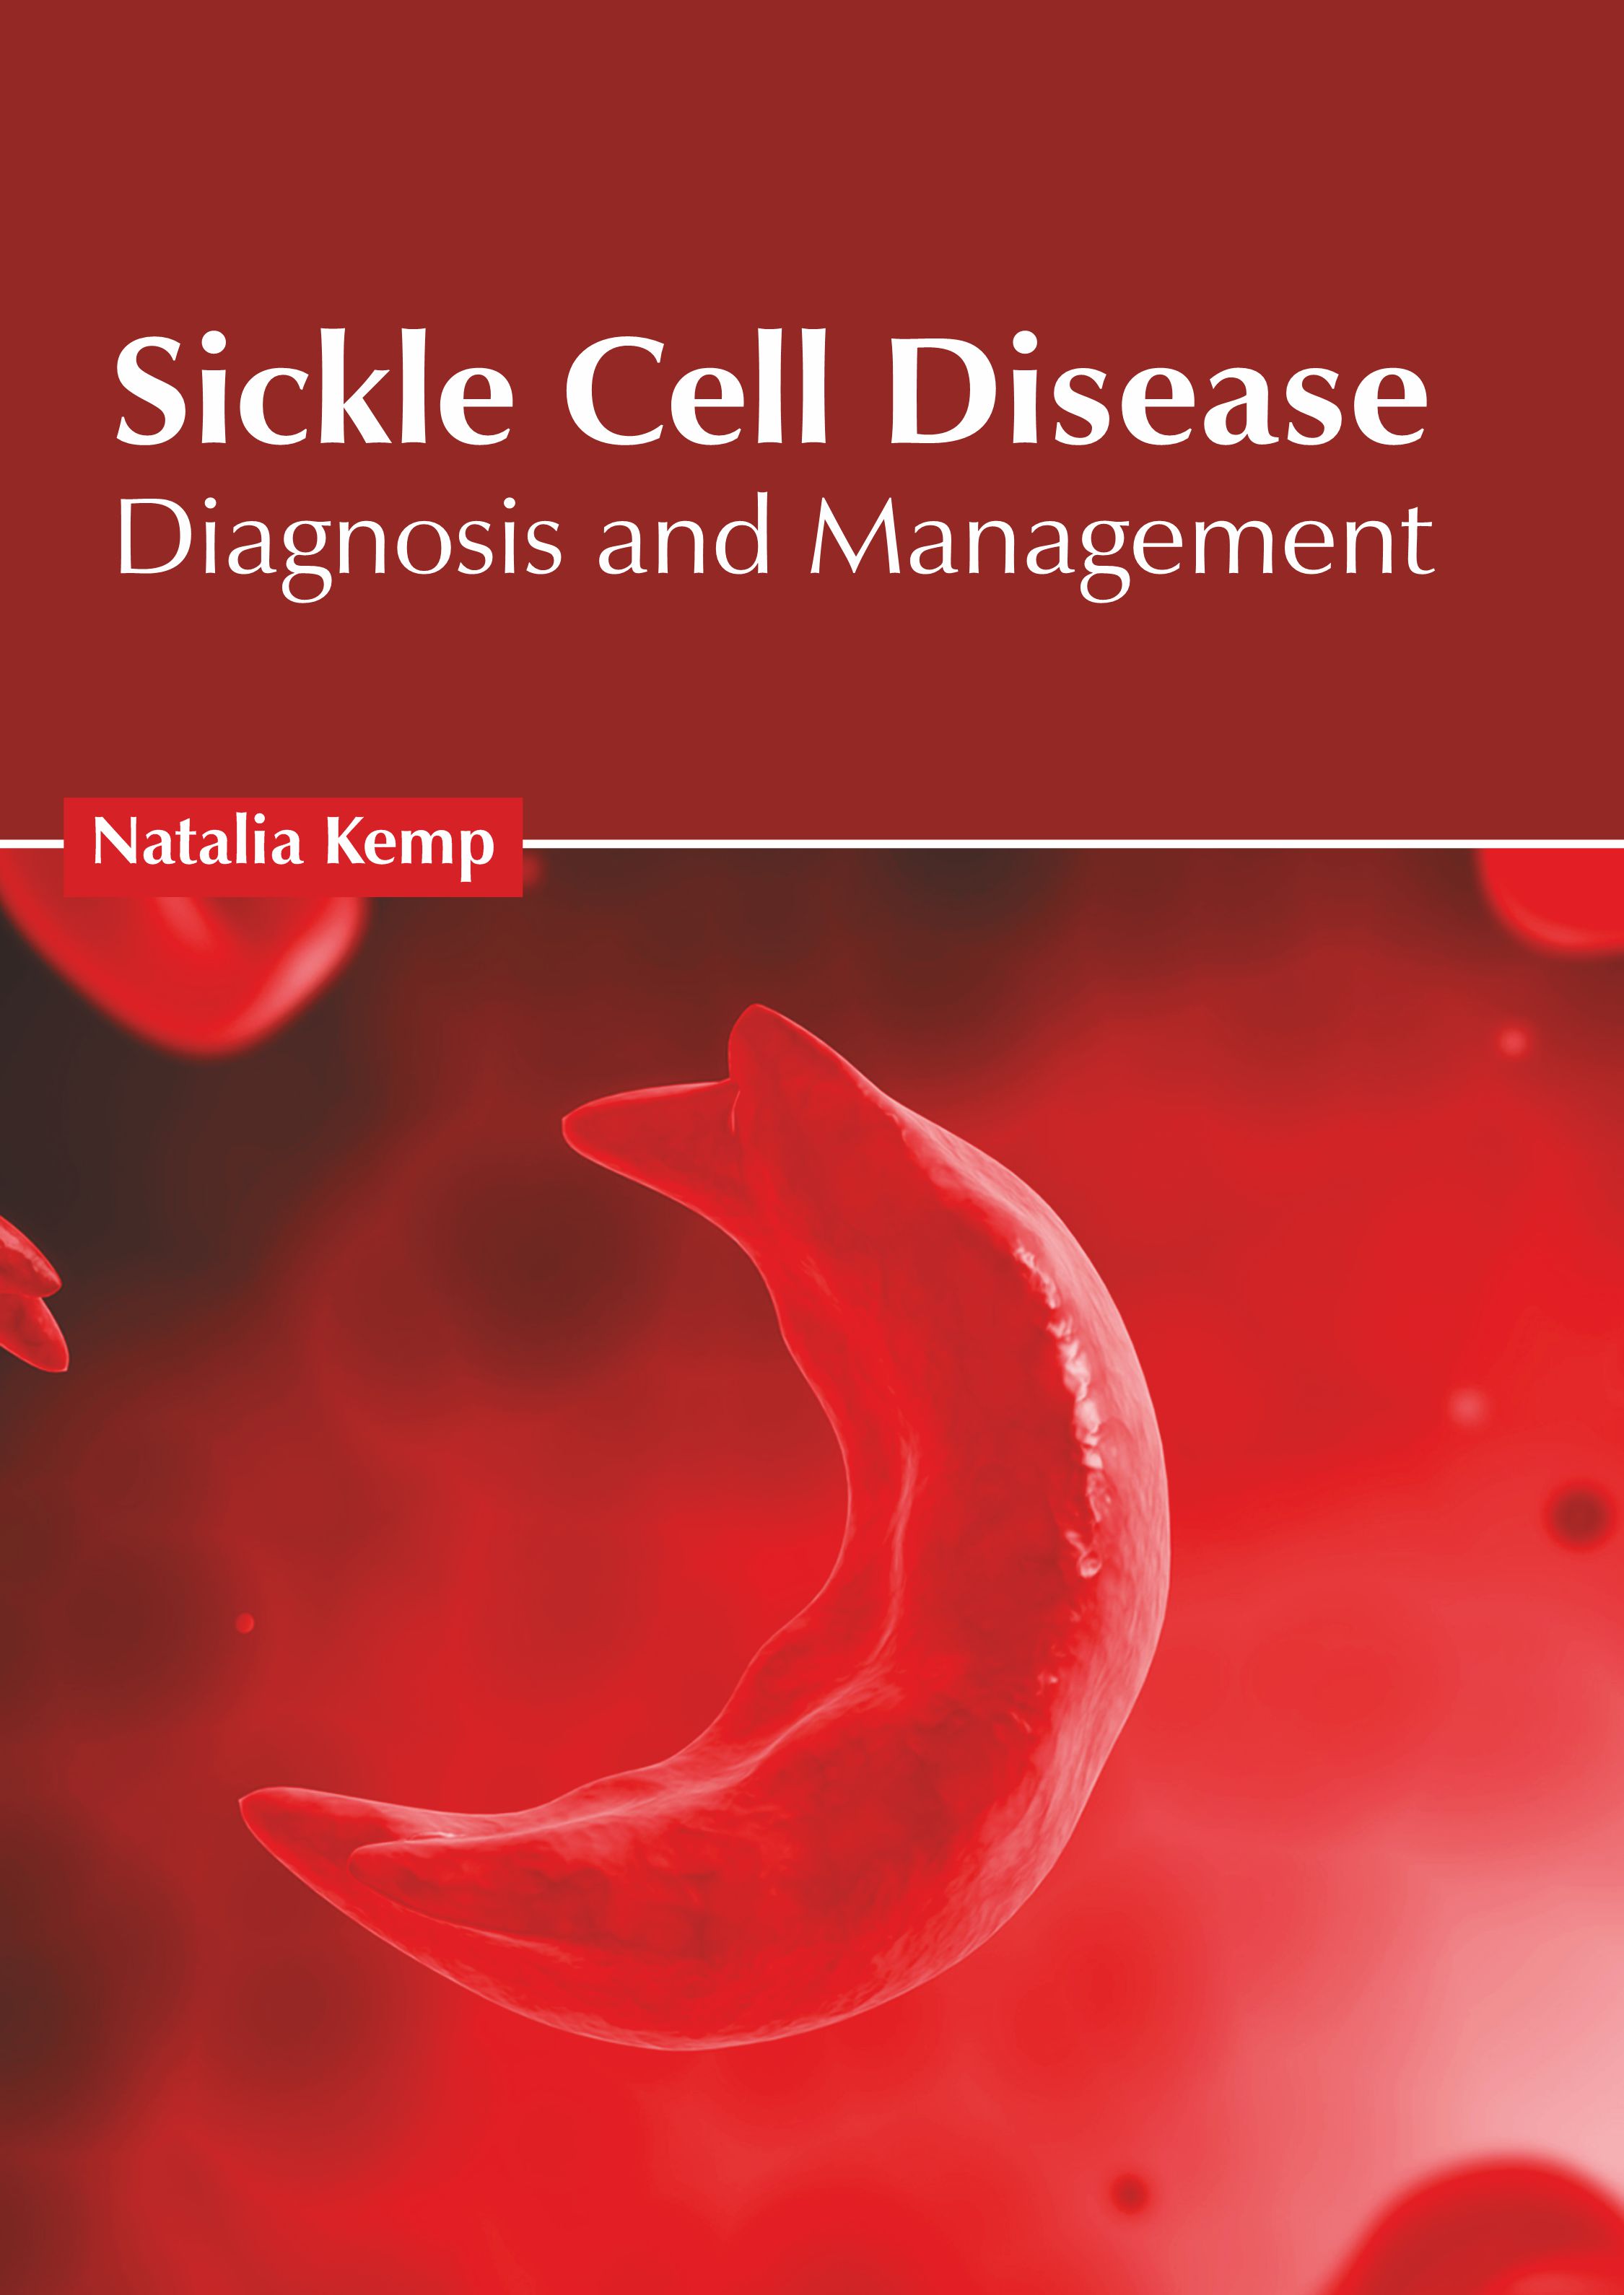 
exclusive-publishers/american-medical-publishers/sickle-cell-disease-diagnosis-and-management-9781639271863